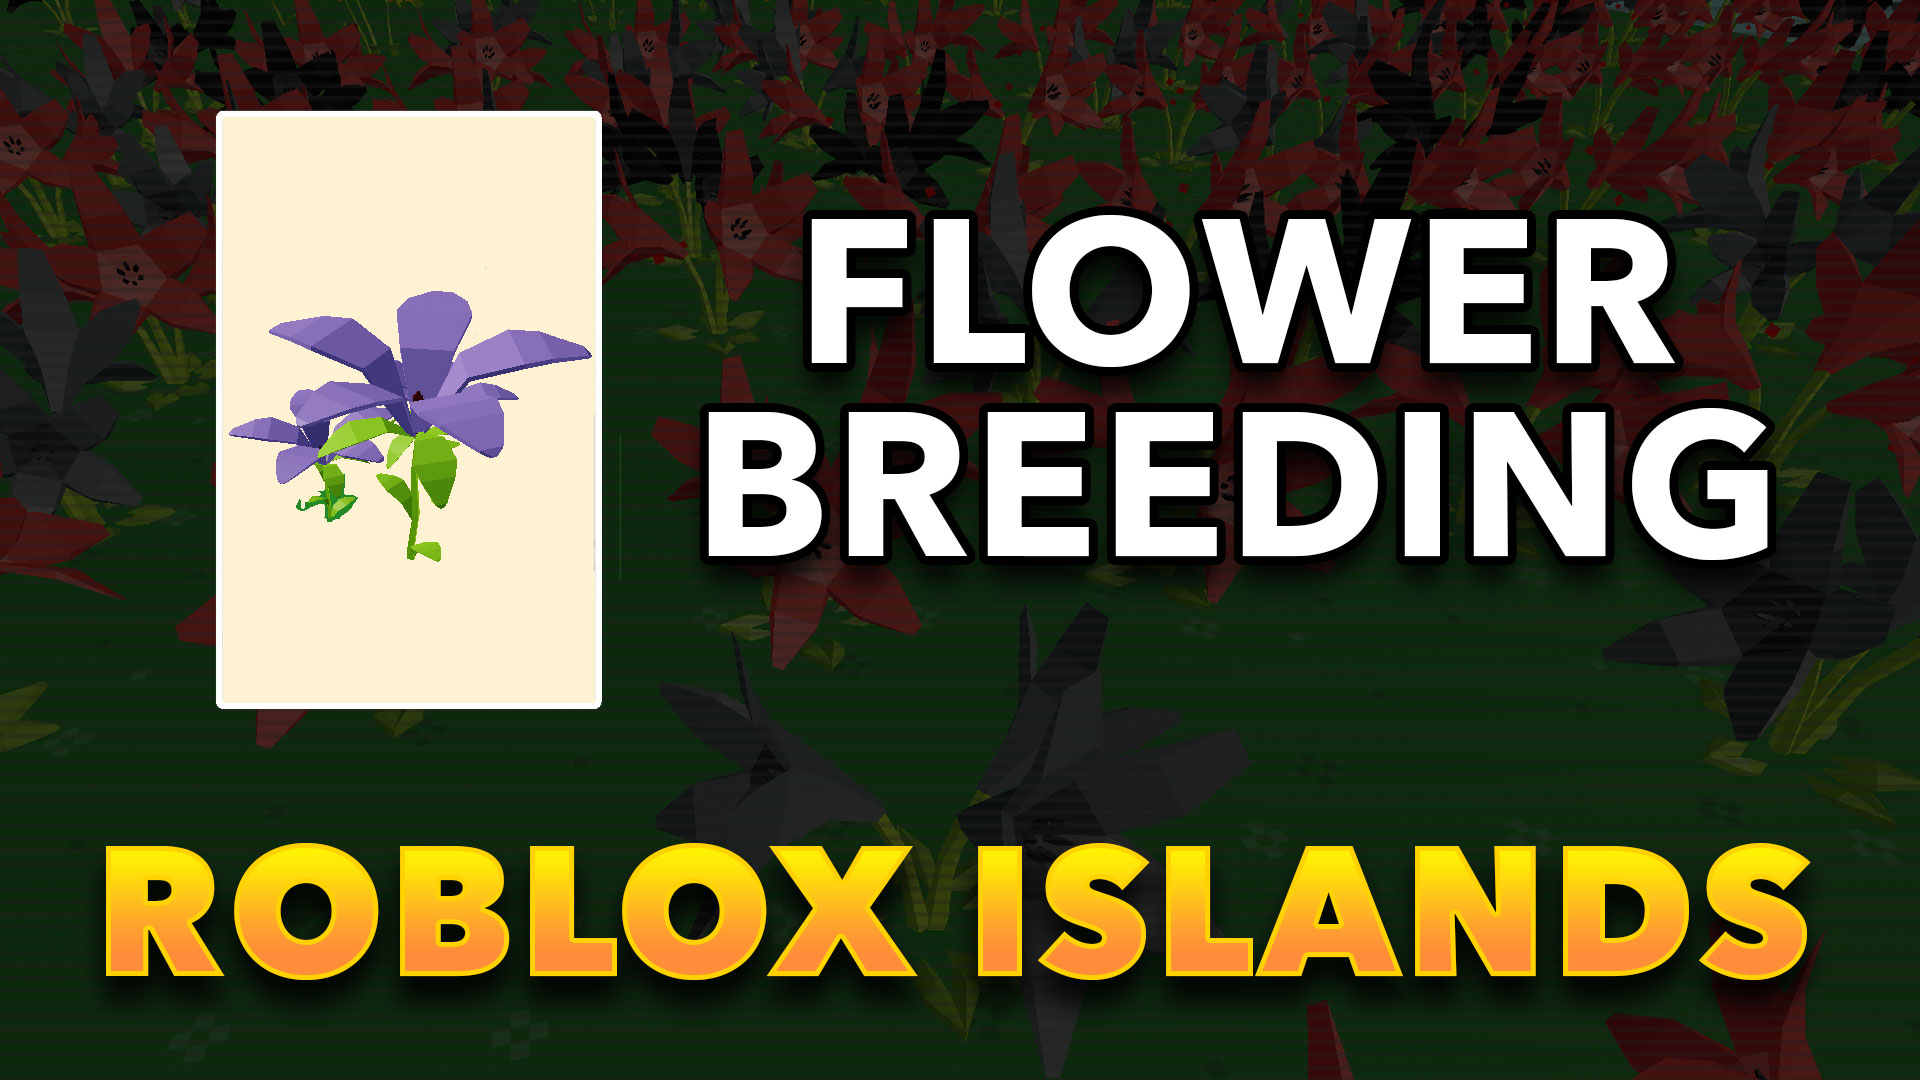 Roblox Islands Flower Breeding Tips And Tricks Thoroughly Tested - find the light roblox